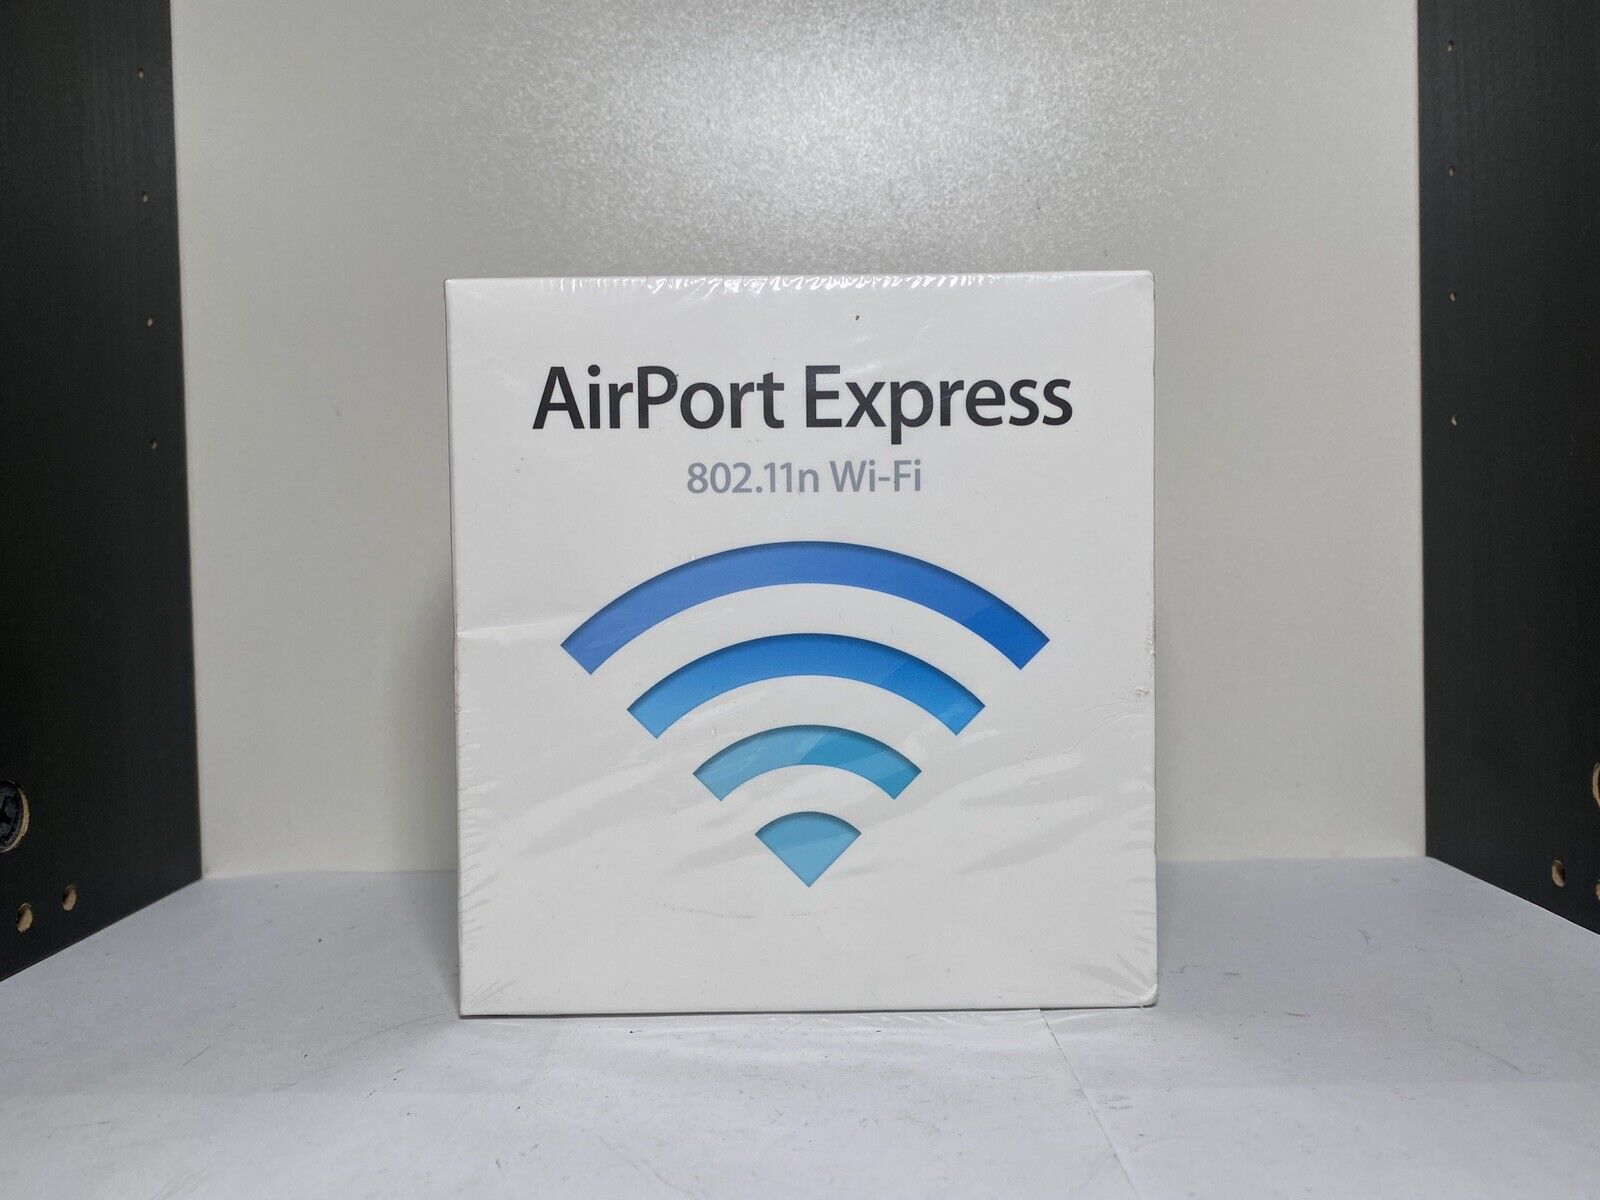 Apple AirPort Express Base Station 1st gen A1264 802.11n WiFi Router New In Box